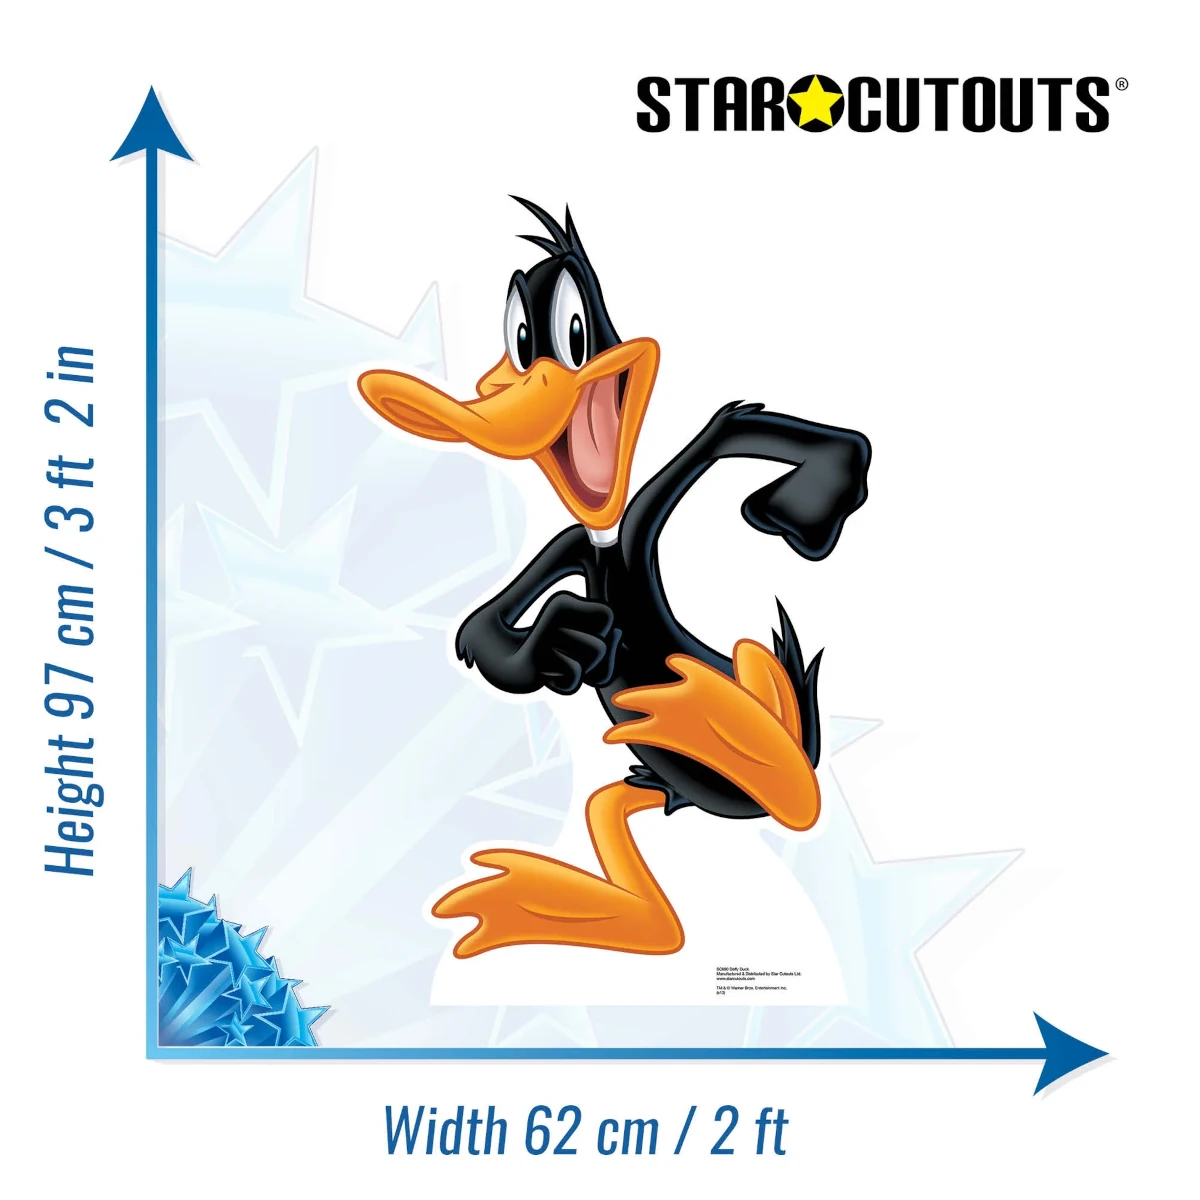 SC690 Daffy Duck (Looney Tunes) Official Lifesize Cardboard Cutout Standee Size